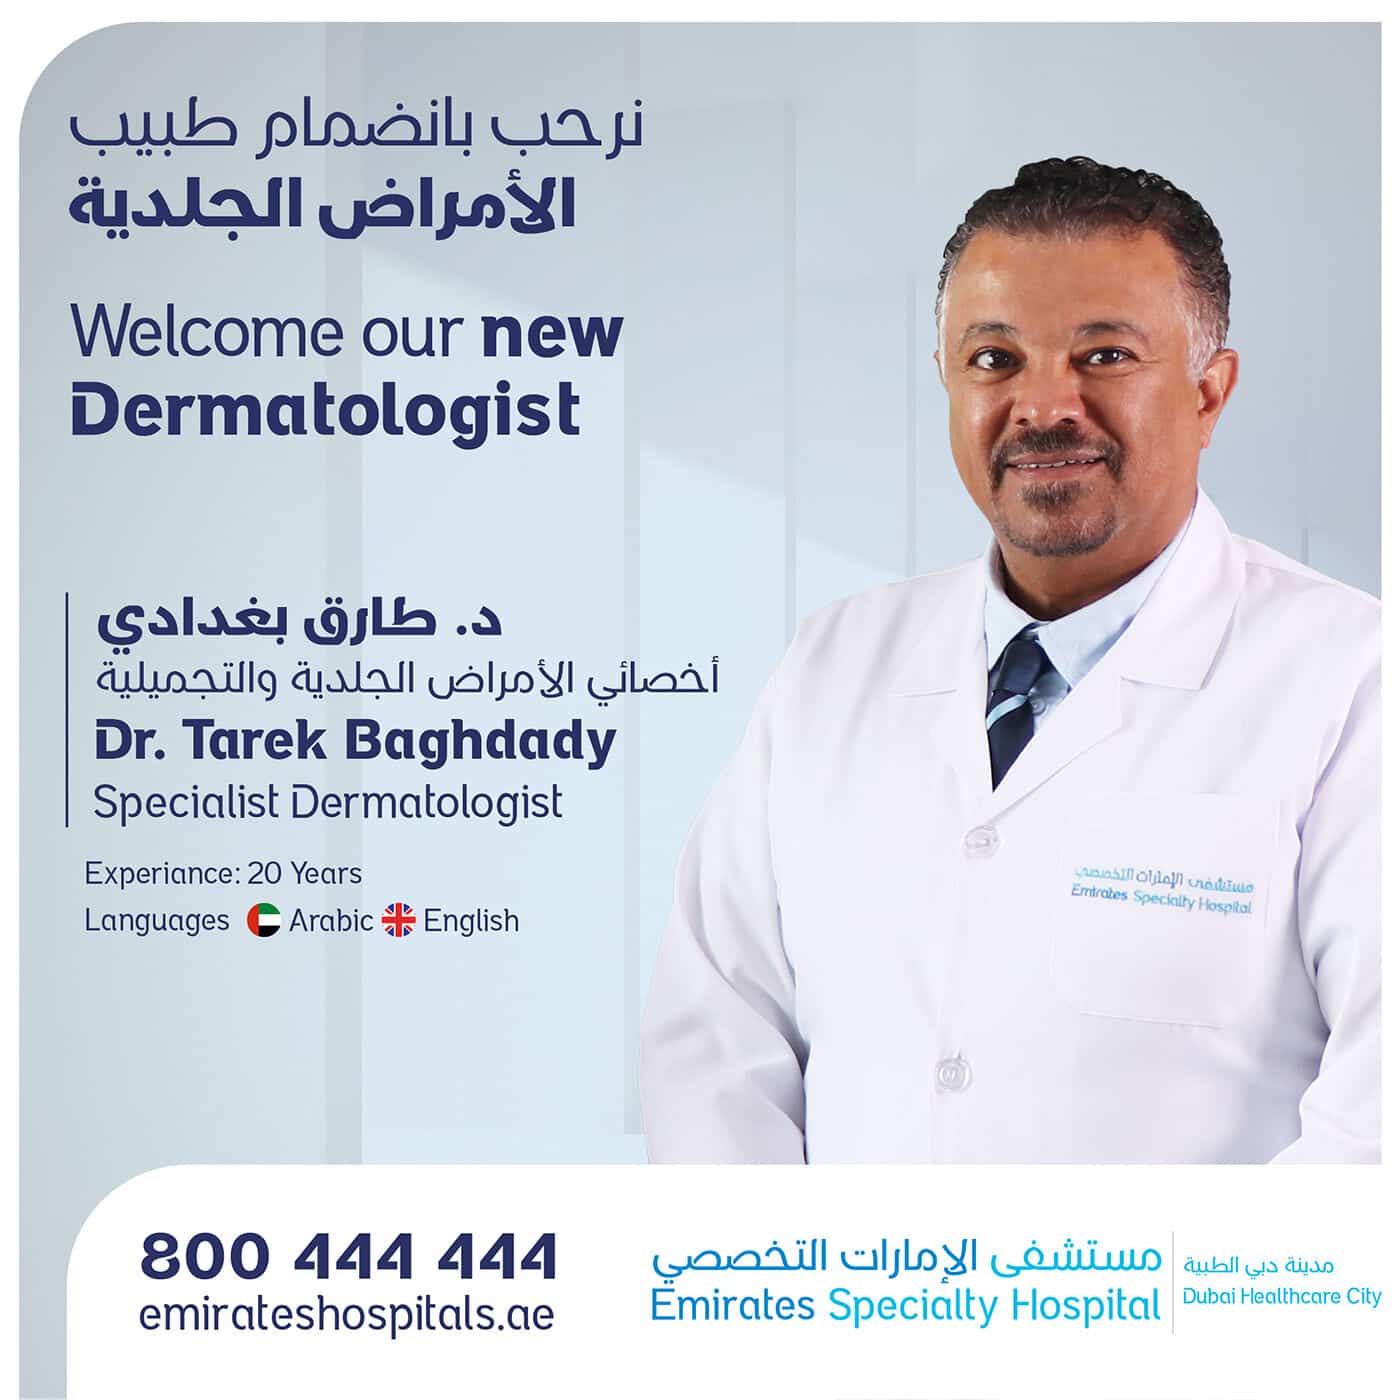 Dr. Tarek Baghdady, Specialist Dermatologist Joined Emirates Specialty Hospital